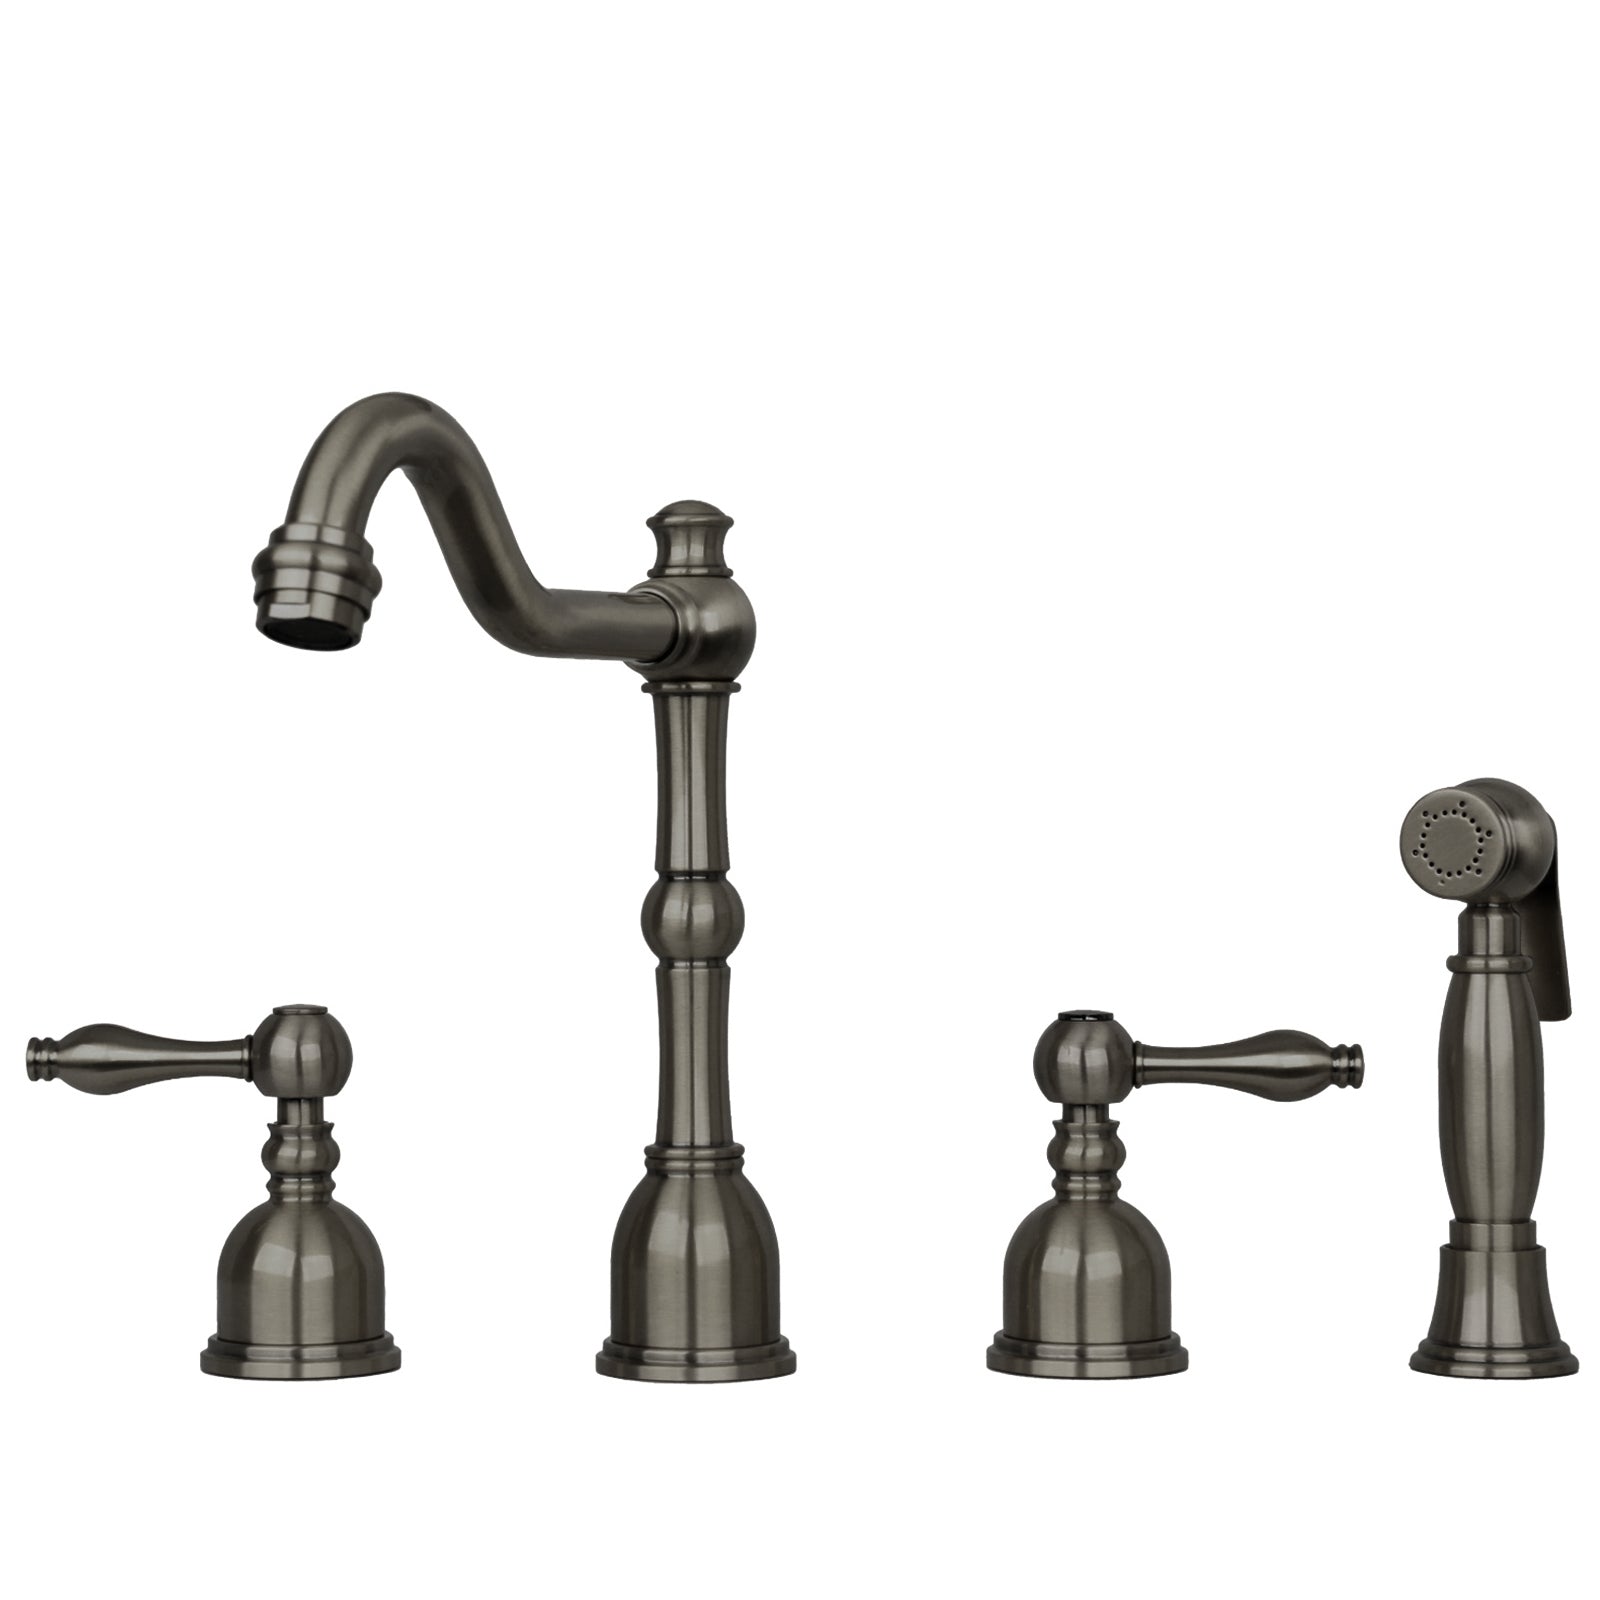 Two-Handles Oil Rubbed Bronze Widespread Kitchen Faucet with Side Sprayer - AK96818-ORB